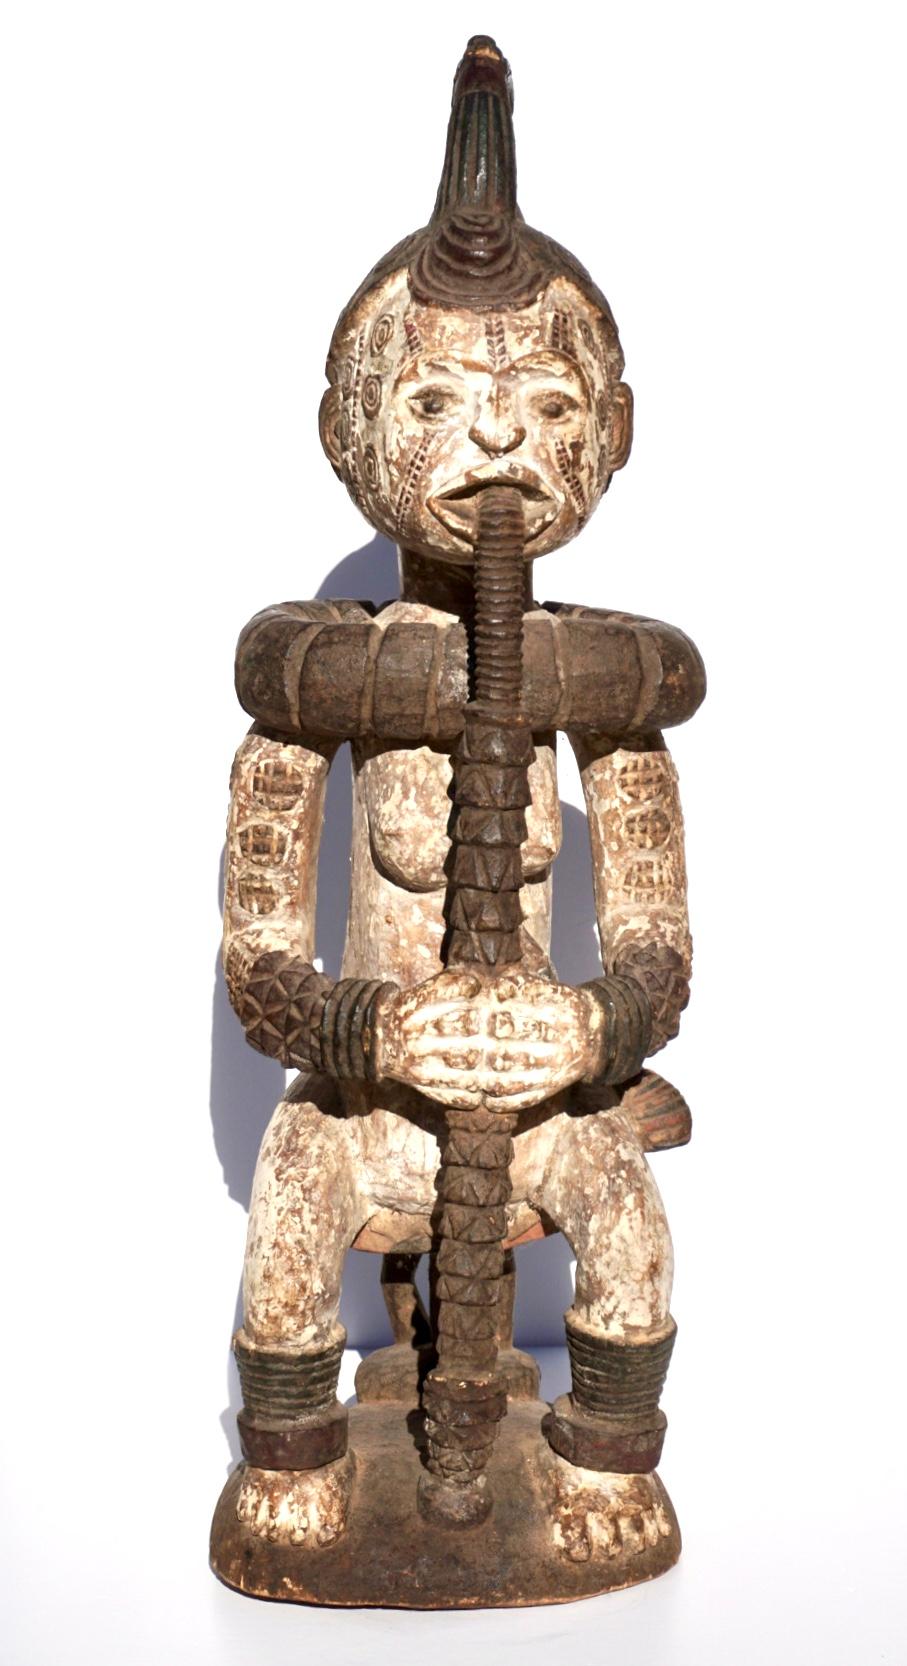 Idoma Ibo Female Figure. Africa, Nigeria 20th century or earlier.

A seated female figure on a stool smoking a long pipe with painted with pigments and adorned with scarification marks in a proud pose. The light body is covered with black and white